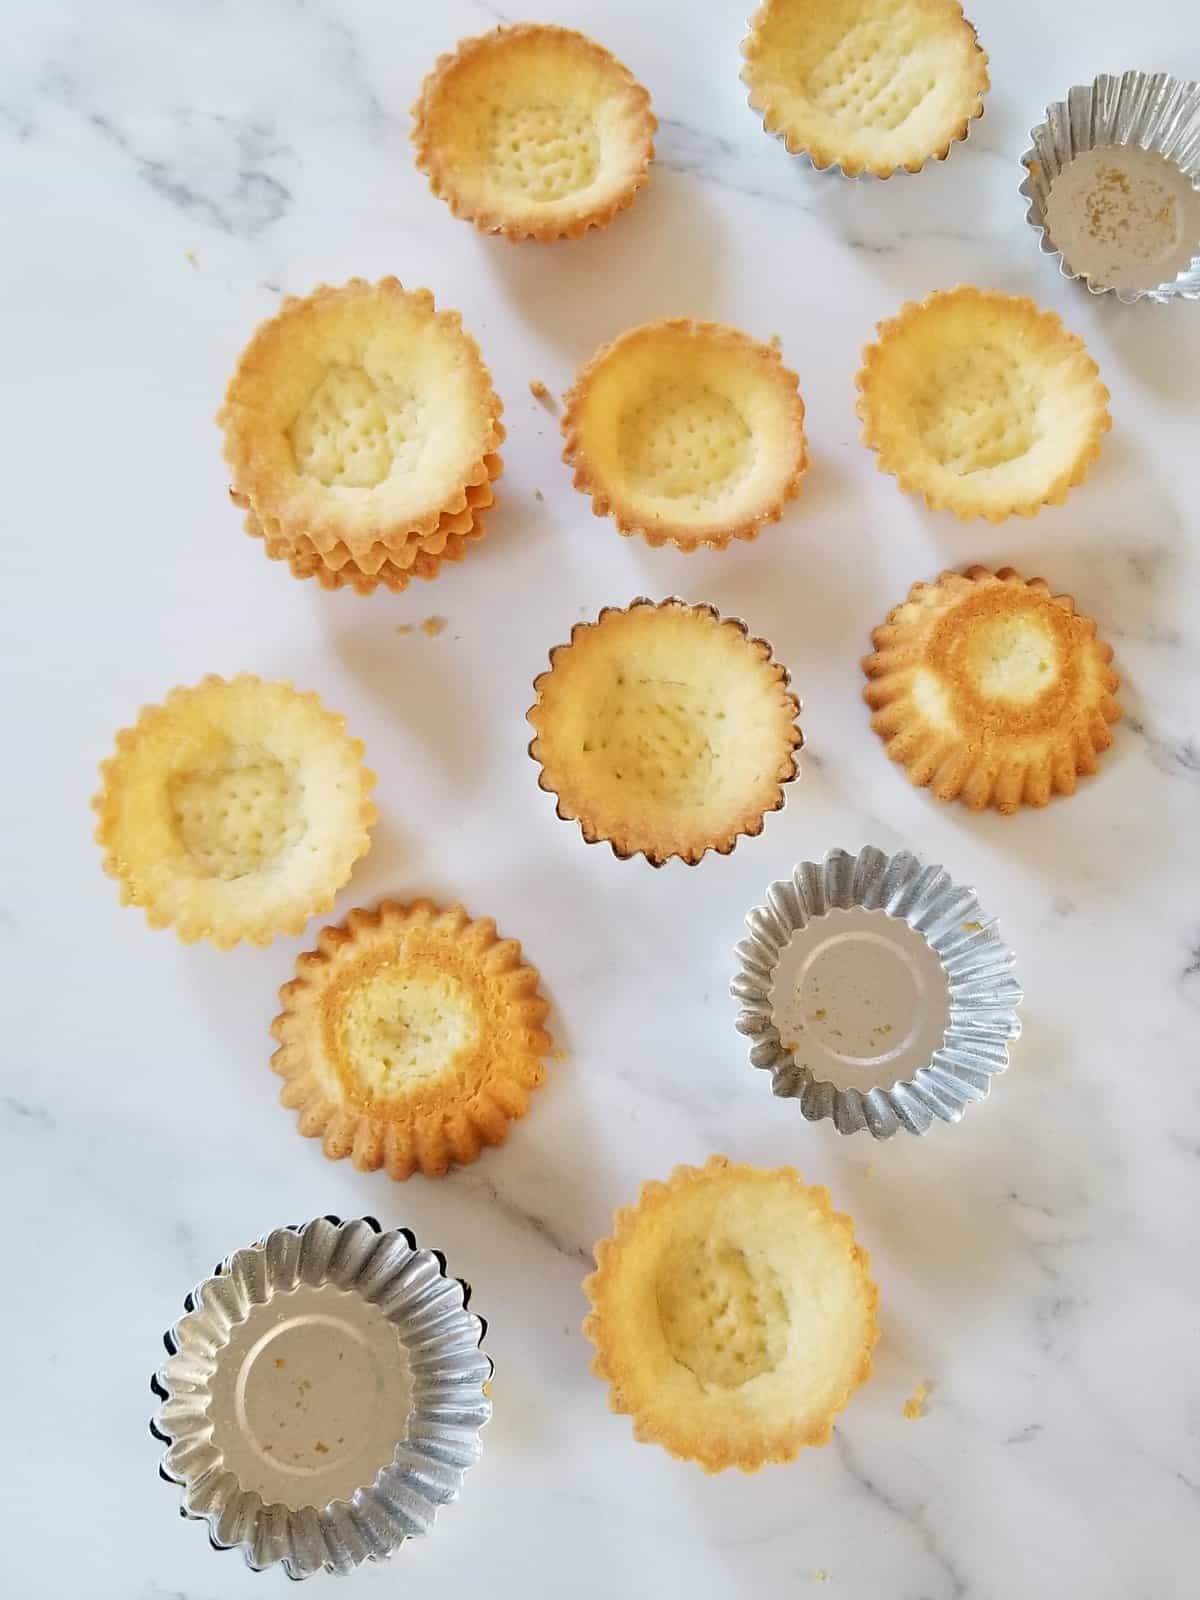 mini tarts baked in individual moulds, scattered on marble background